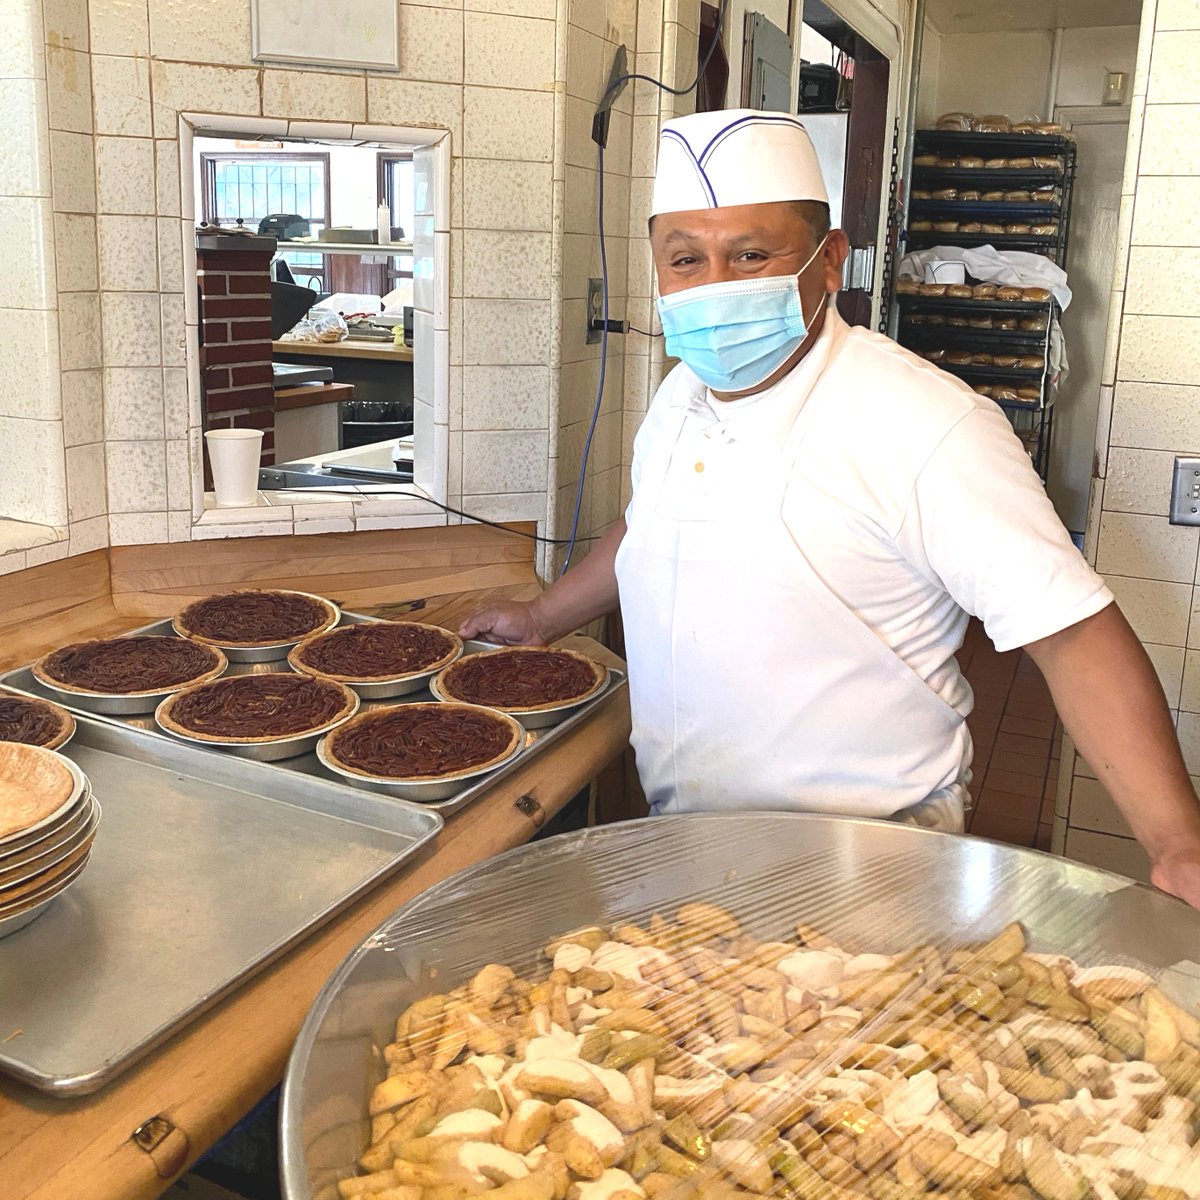 There's nothing like the smell of fresh pecan pie straight out of the oven. Rodrigo has been baking our pies for 23 years now, and the smile on his face hasn't changed! #applepan #qualityforever #pie #pecanpie #applepie #iconic #LA #baking